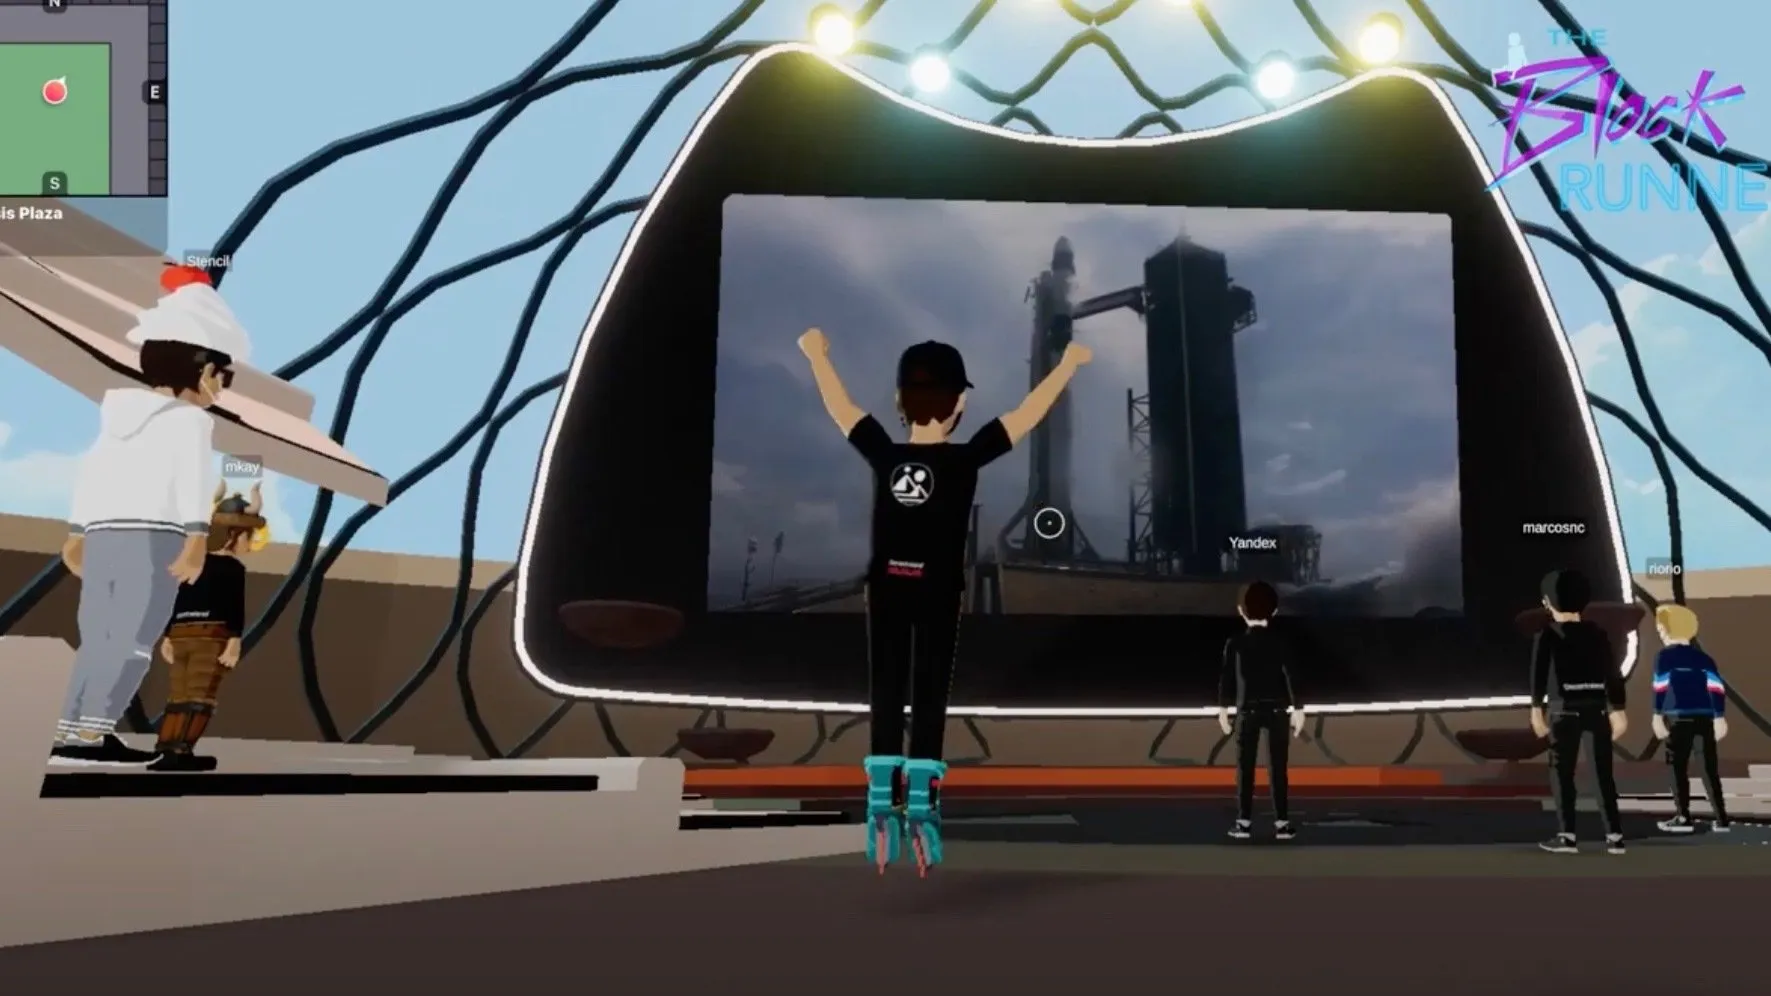 Avatars watch the SpaceX launch in Decentraland. Image: YouTube.